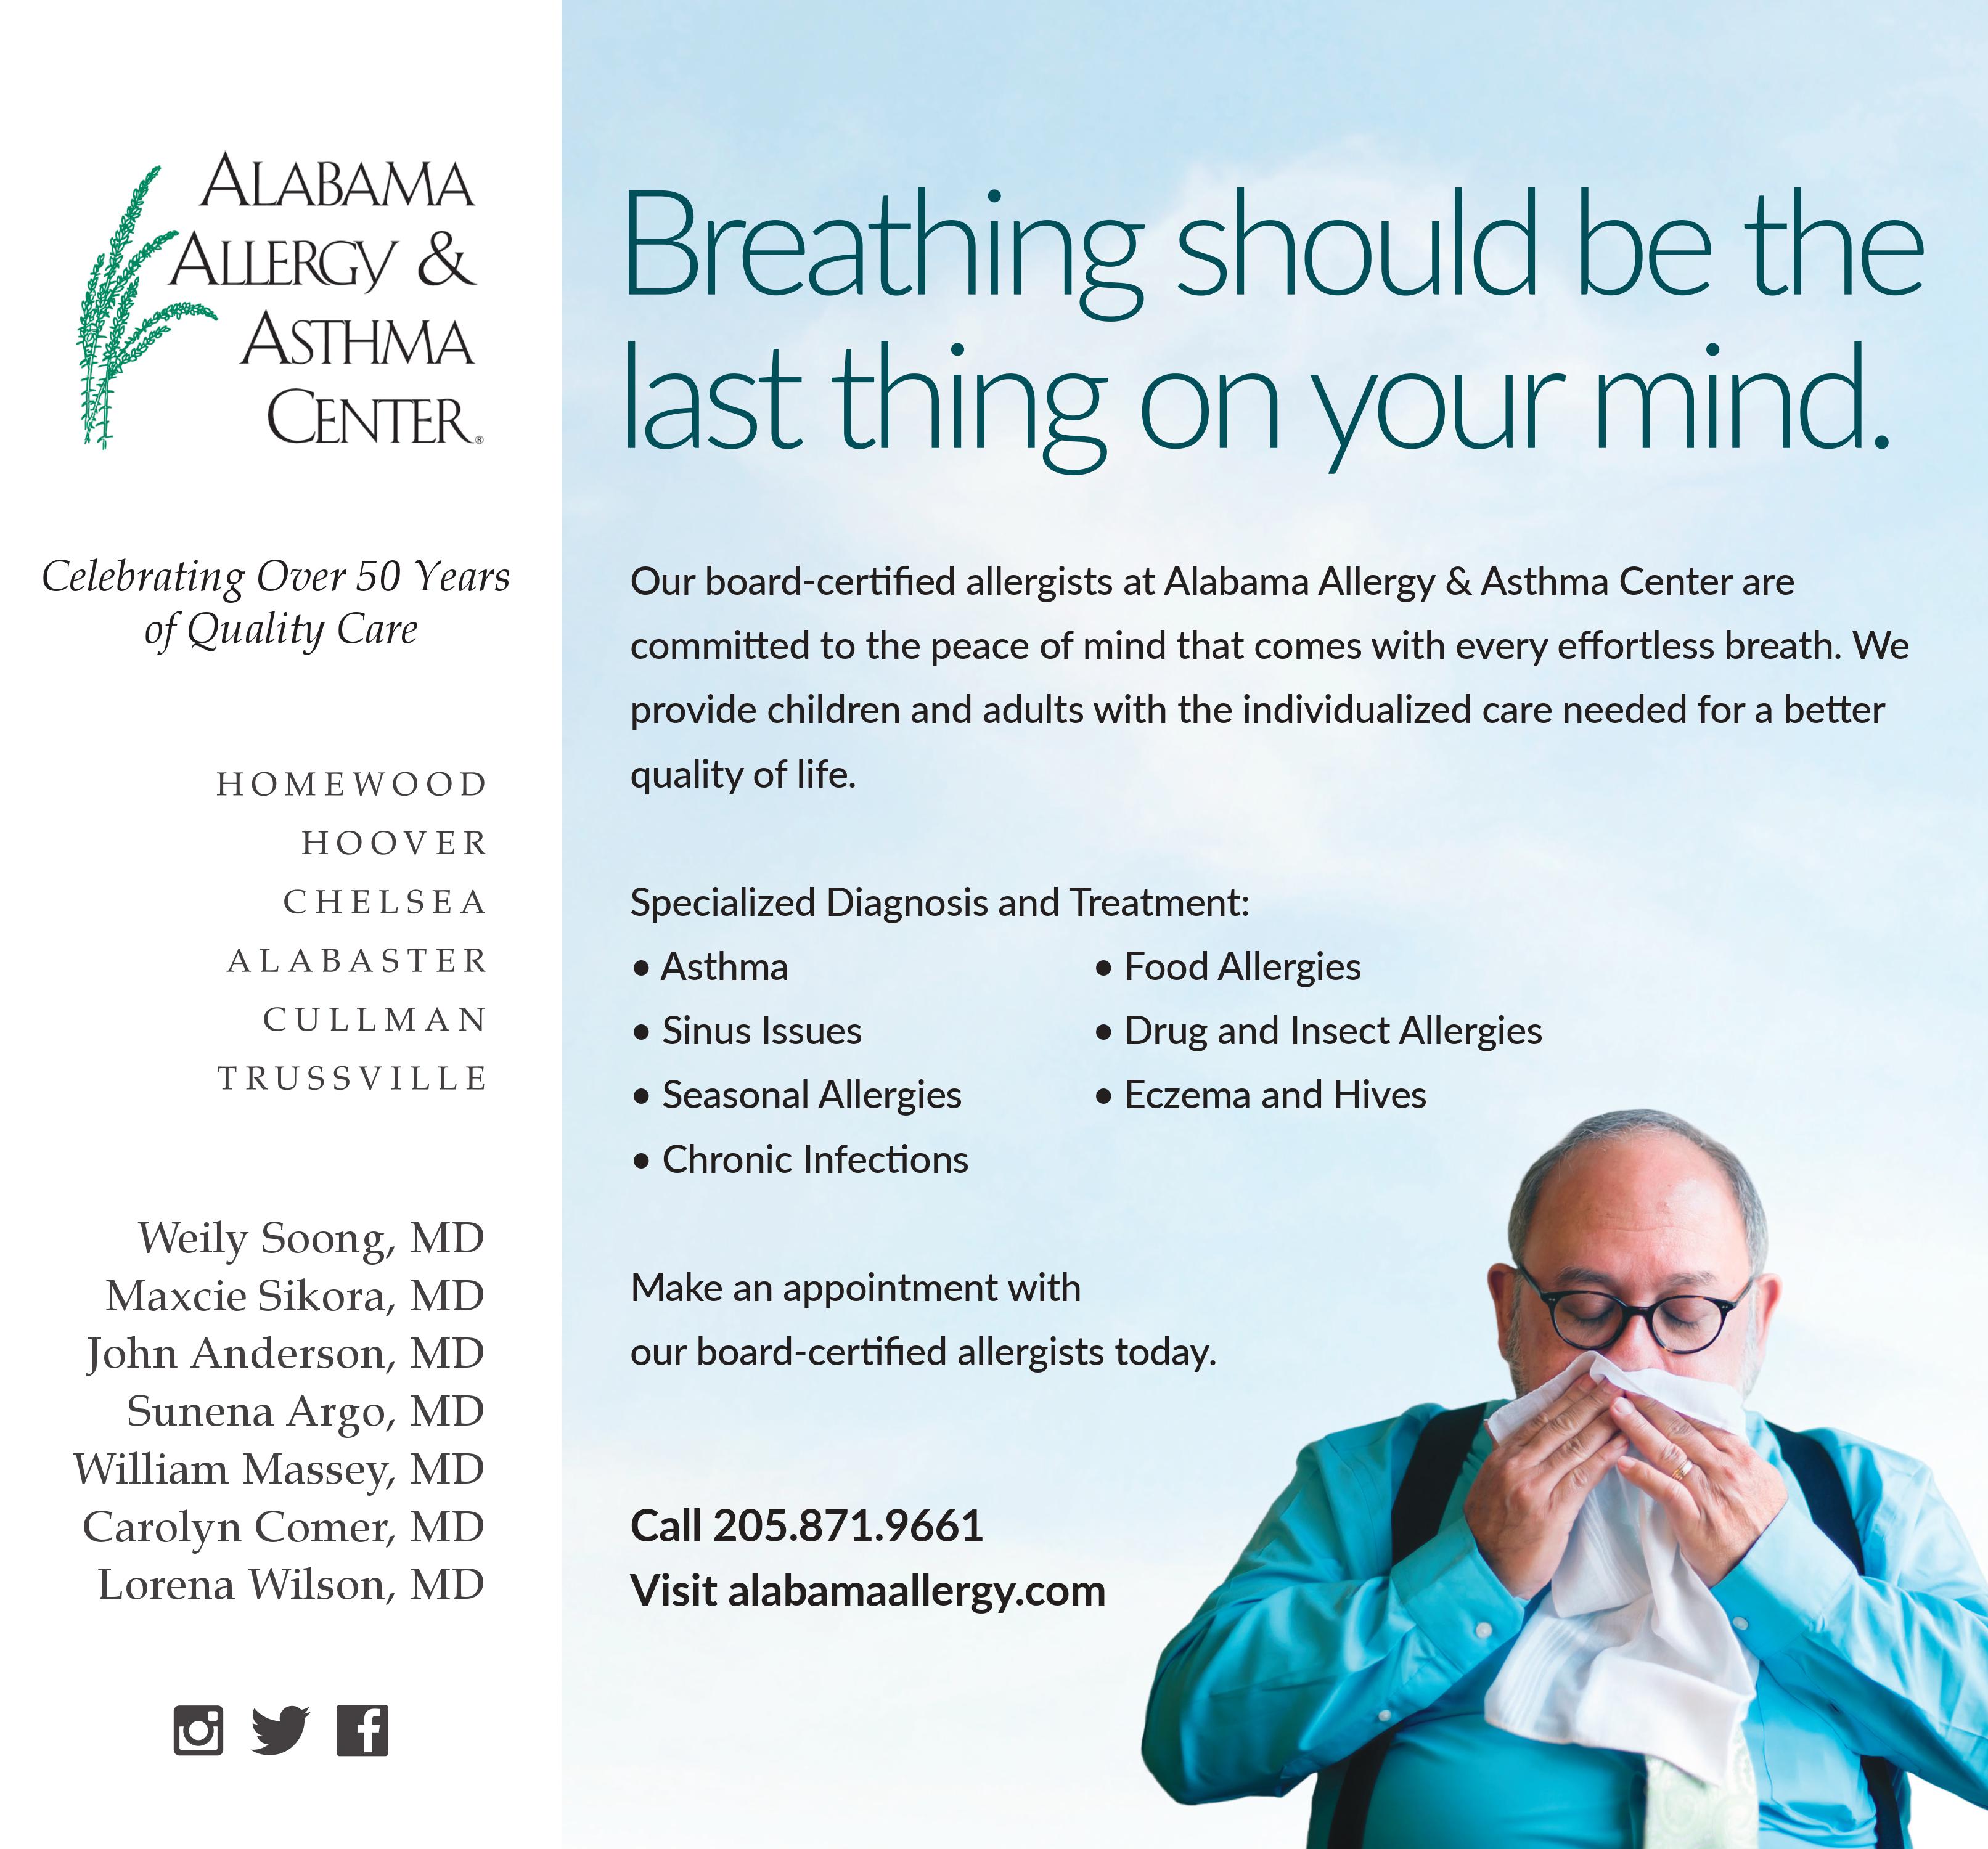 Alabama Allergy & Asthma Center specializes in relief